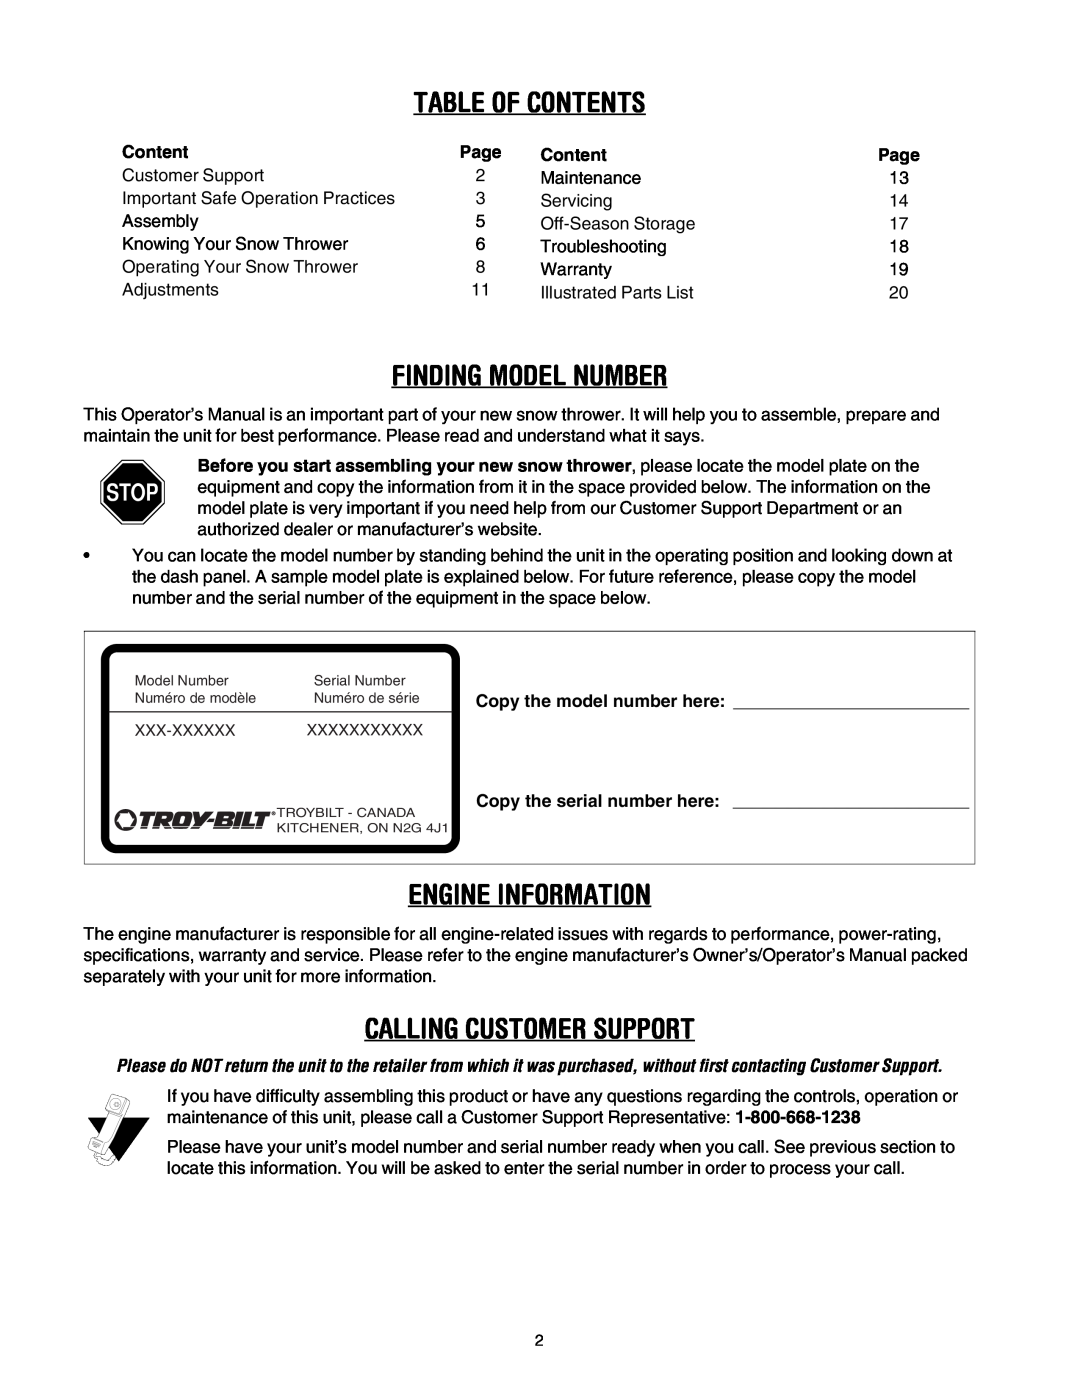 Troy-Bilt OEM-390-679 manual Table Of Contents, Finding Model Number, Engine Information, Calling Customer Support, Page 